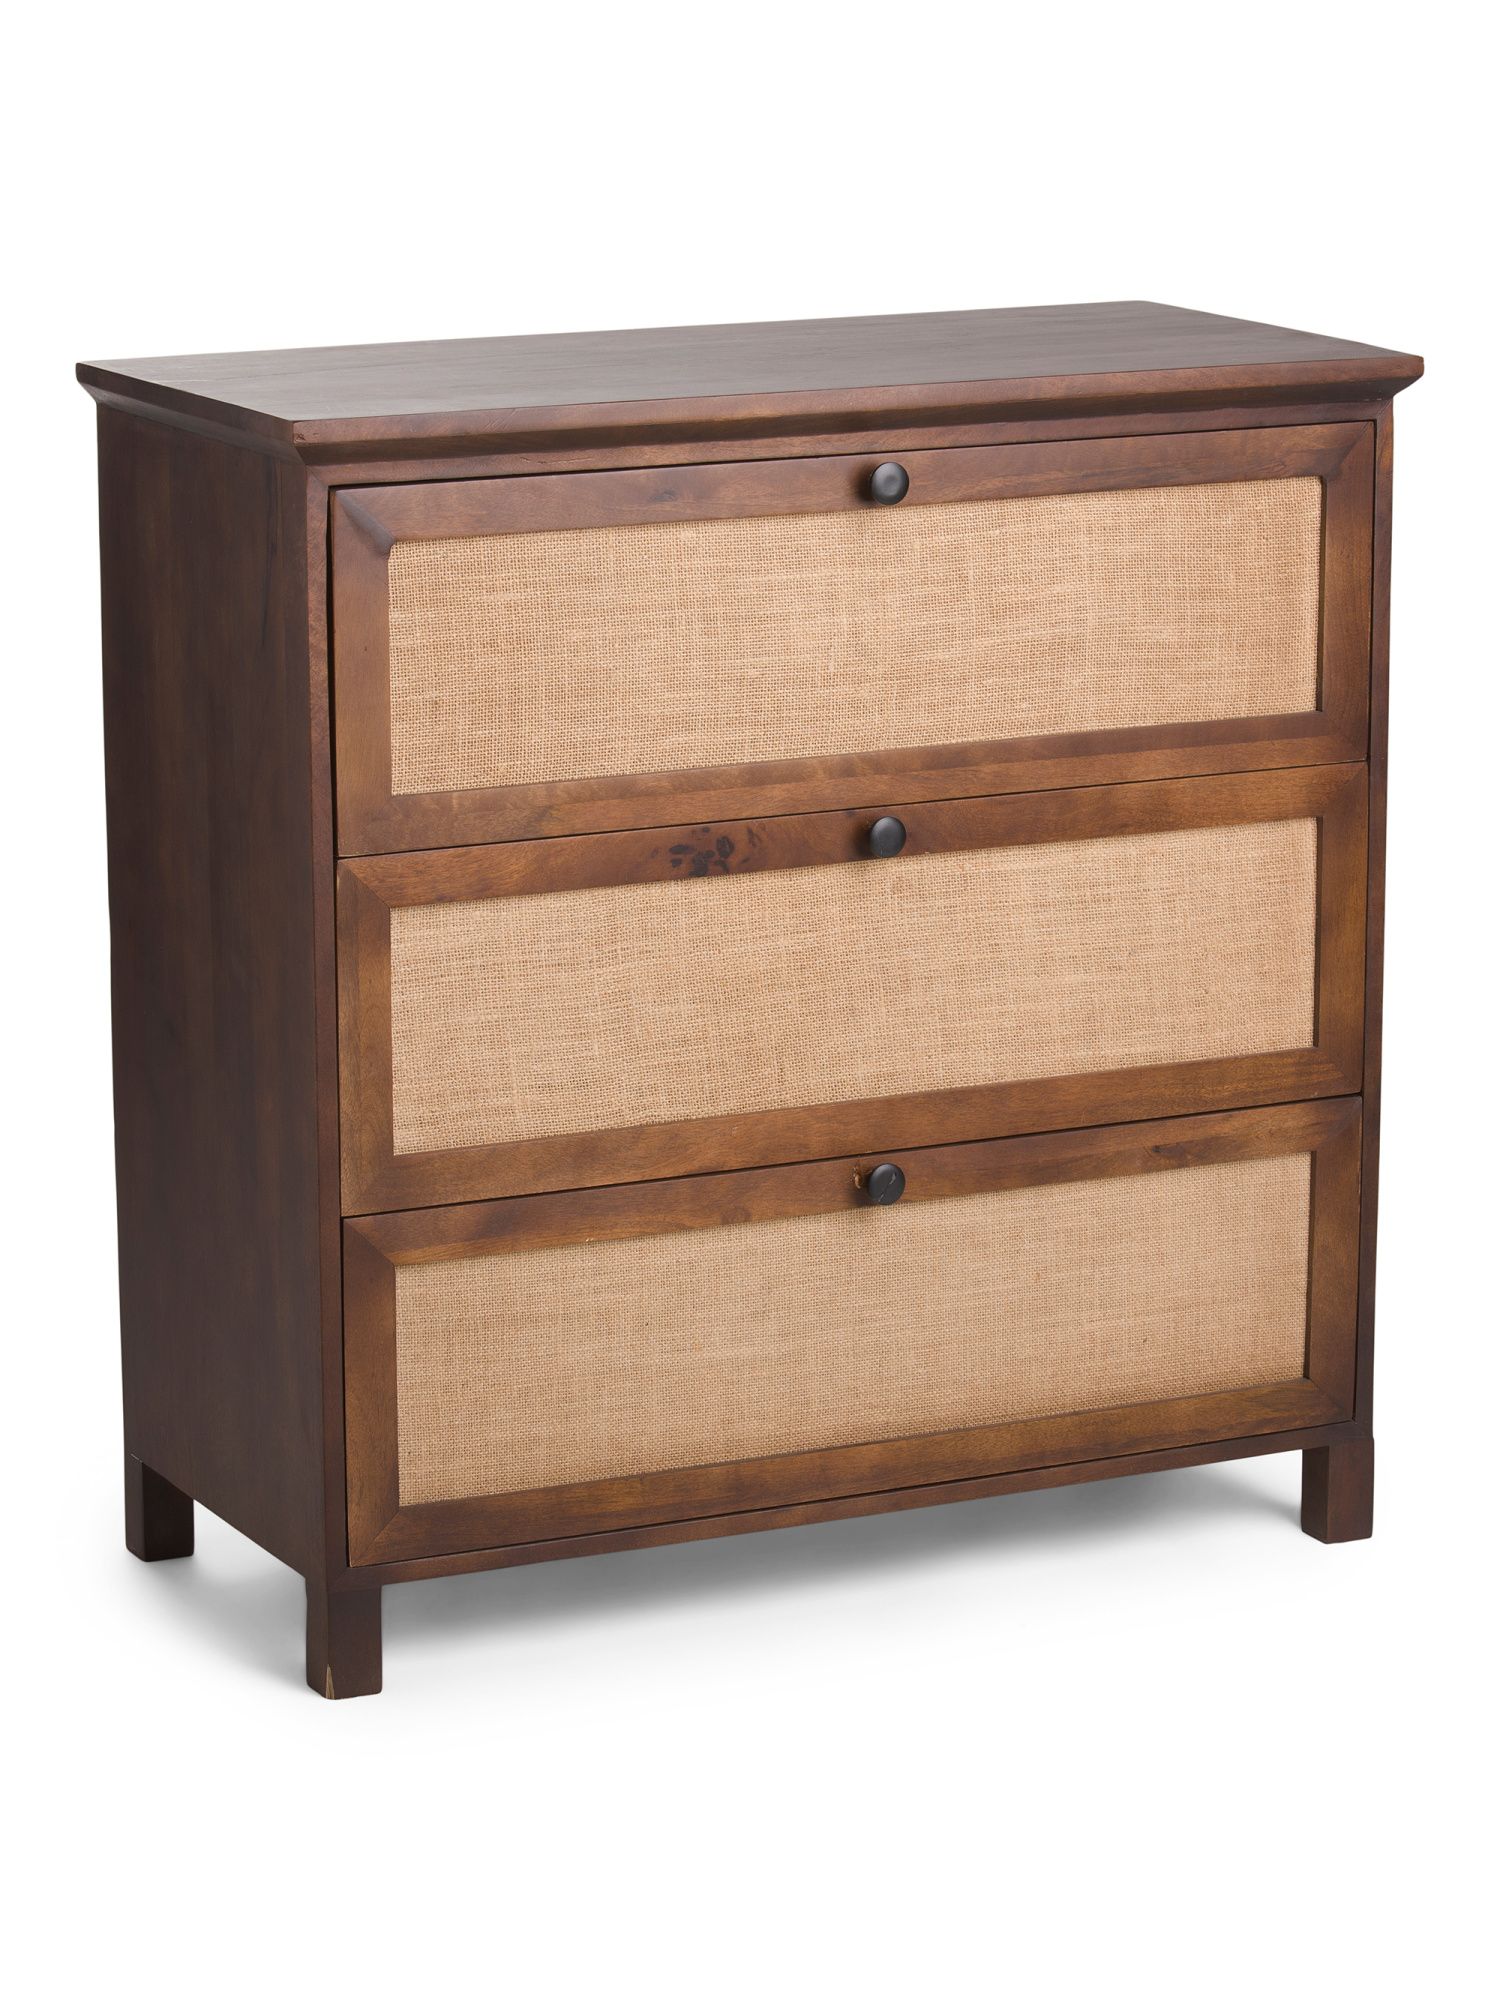 3 Drawer Mango Wood Cabinet With Natural Cane | TJ Maxx